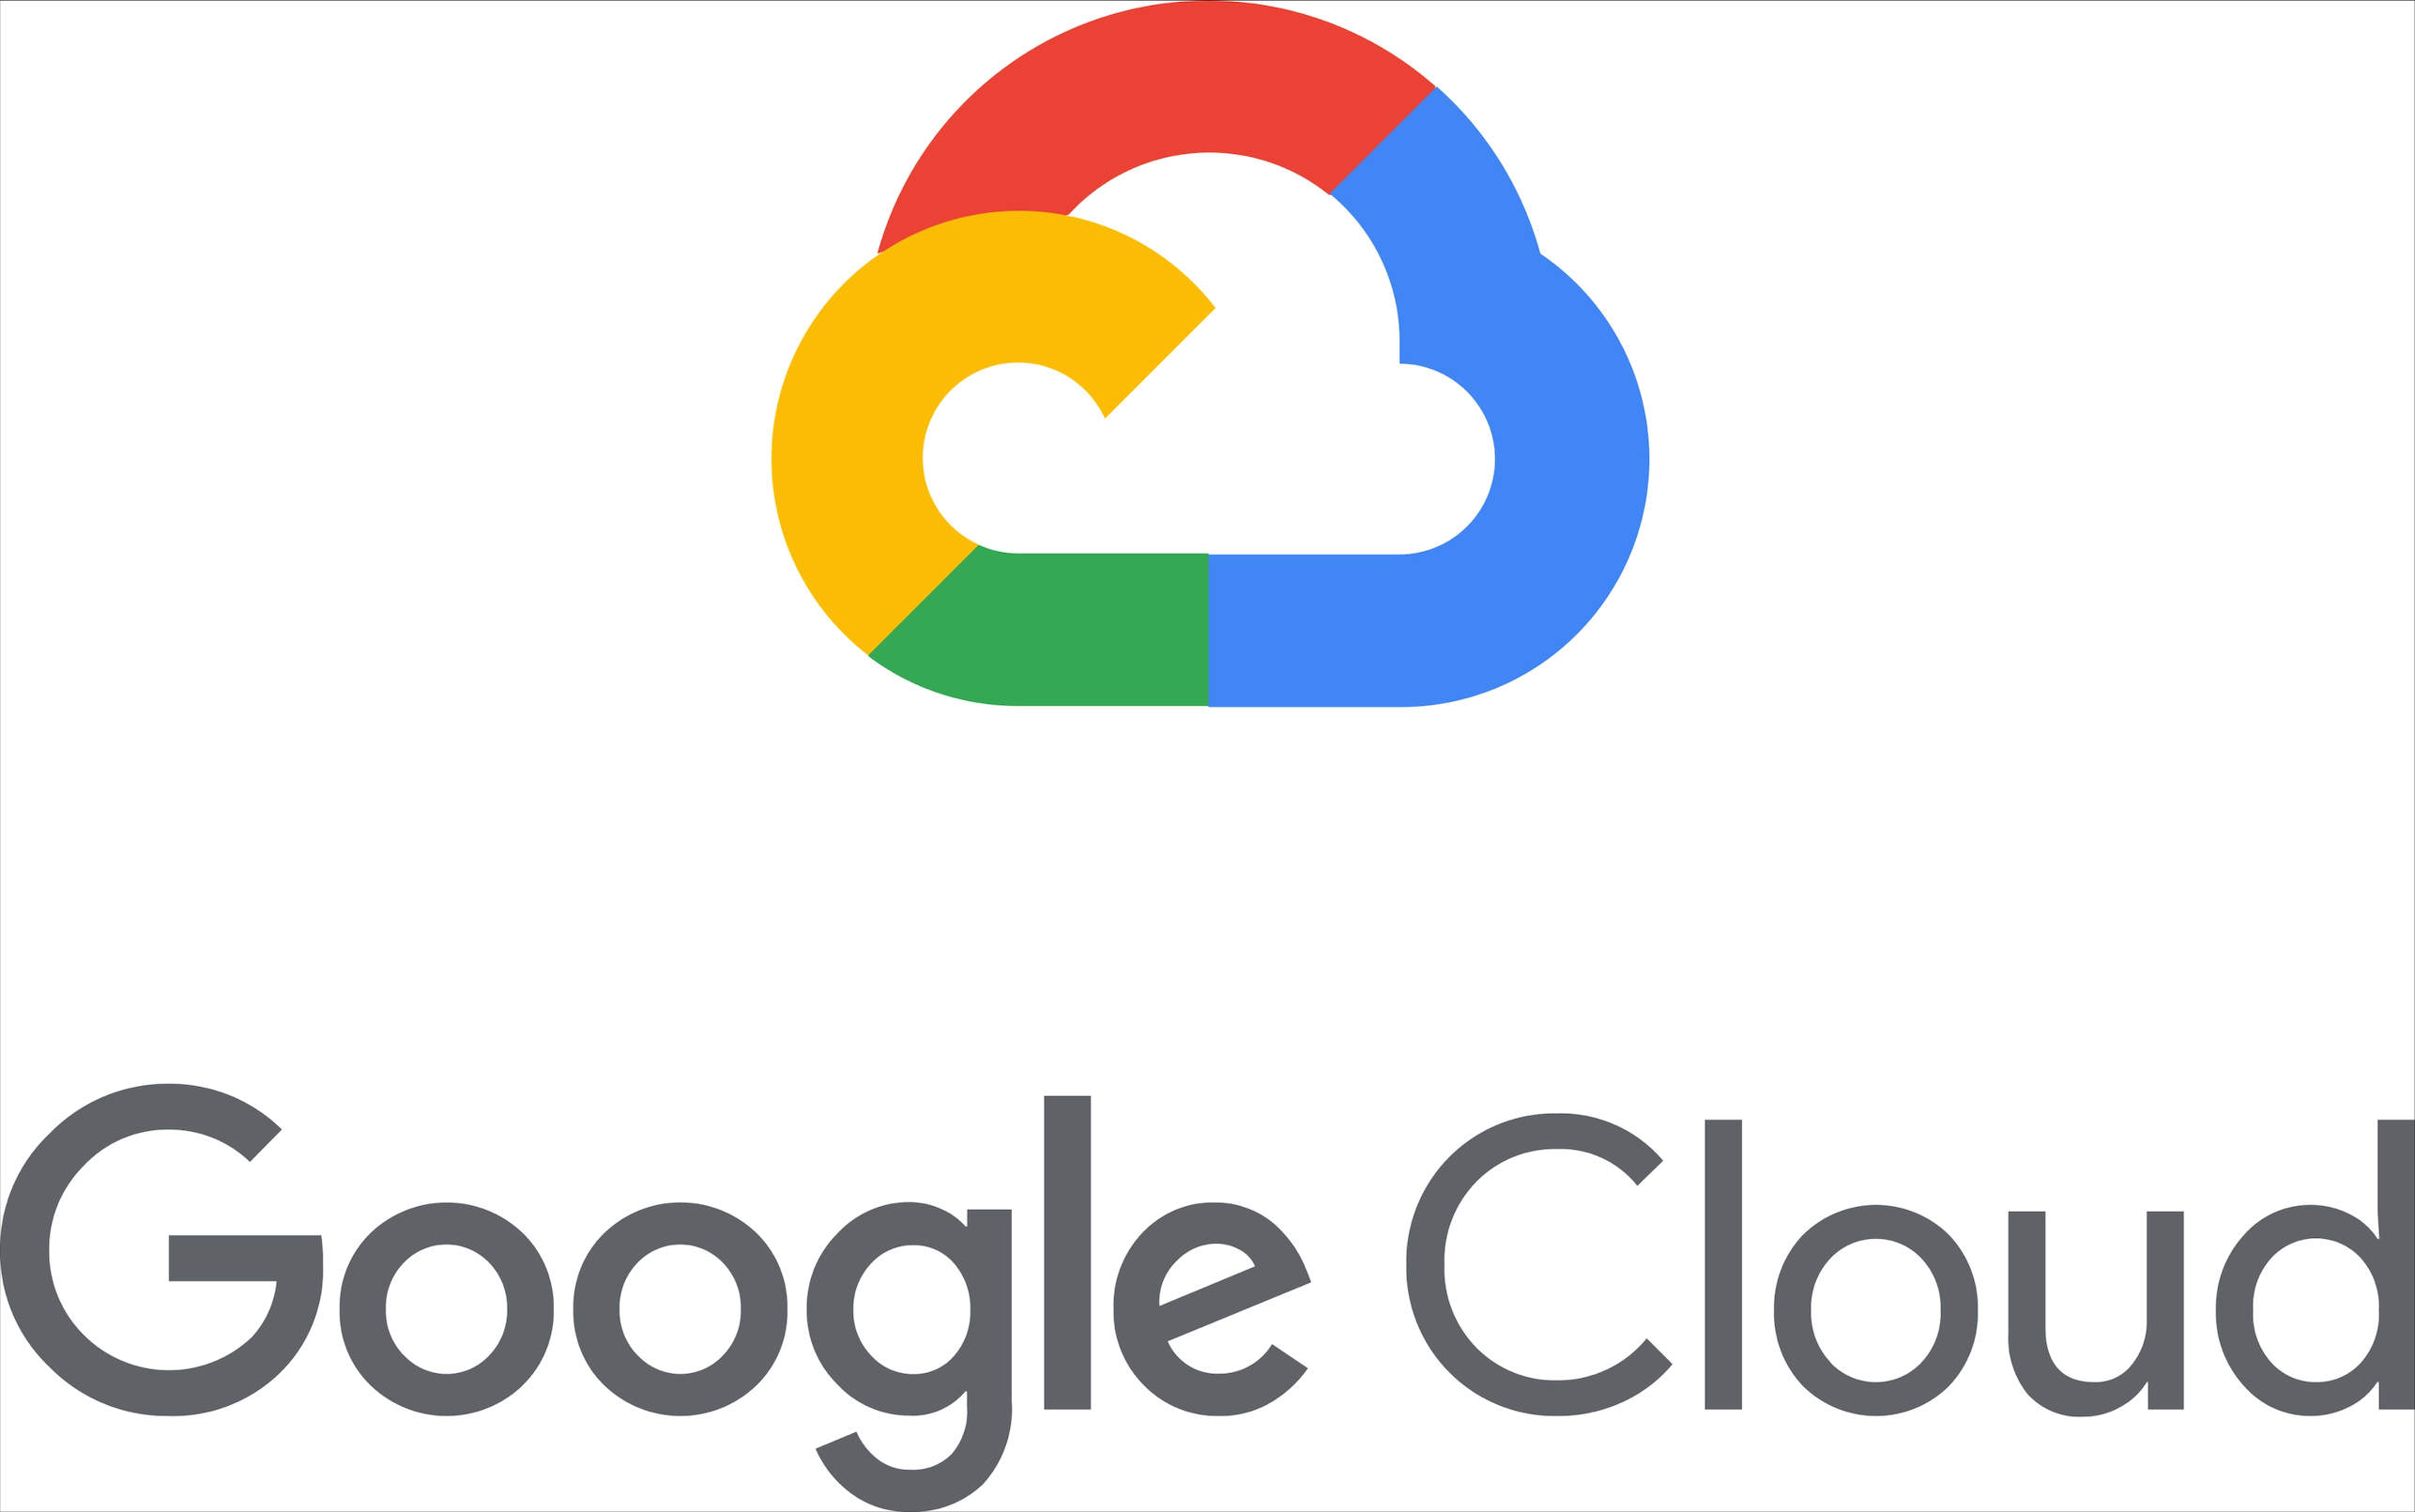 VINGROUP ENTERS COLLABORATION WITH GOOGLE CLOUD TO MODERNIZE GROUP-WIDE SAP APPLICATIONS AND ACCELERATE DIGITAL TRANSFORMATION